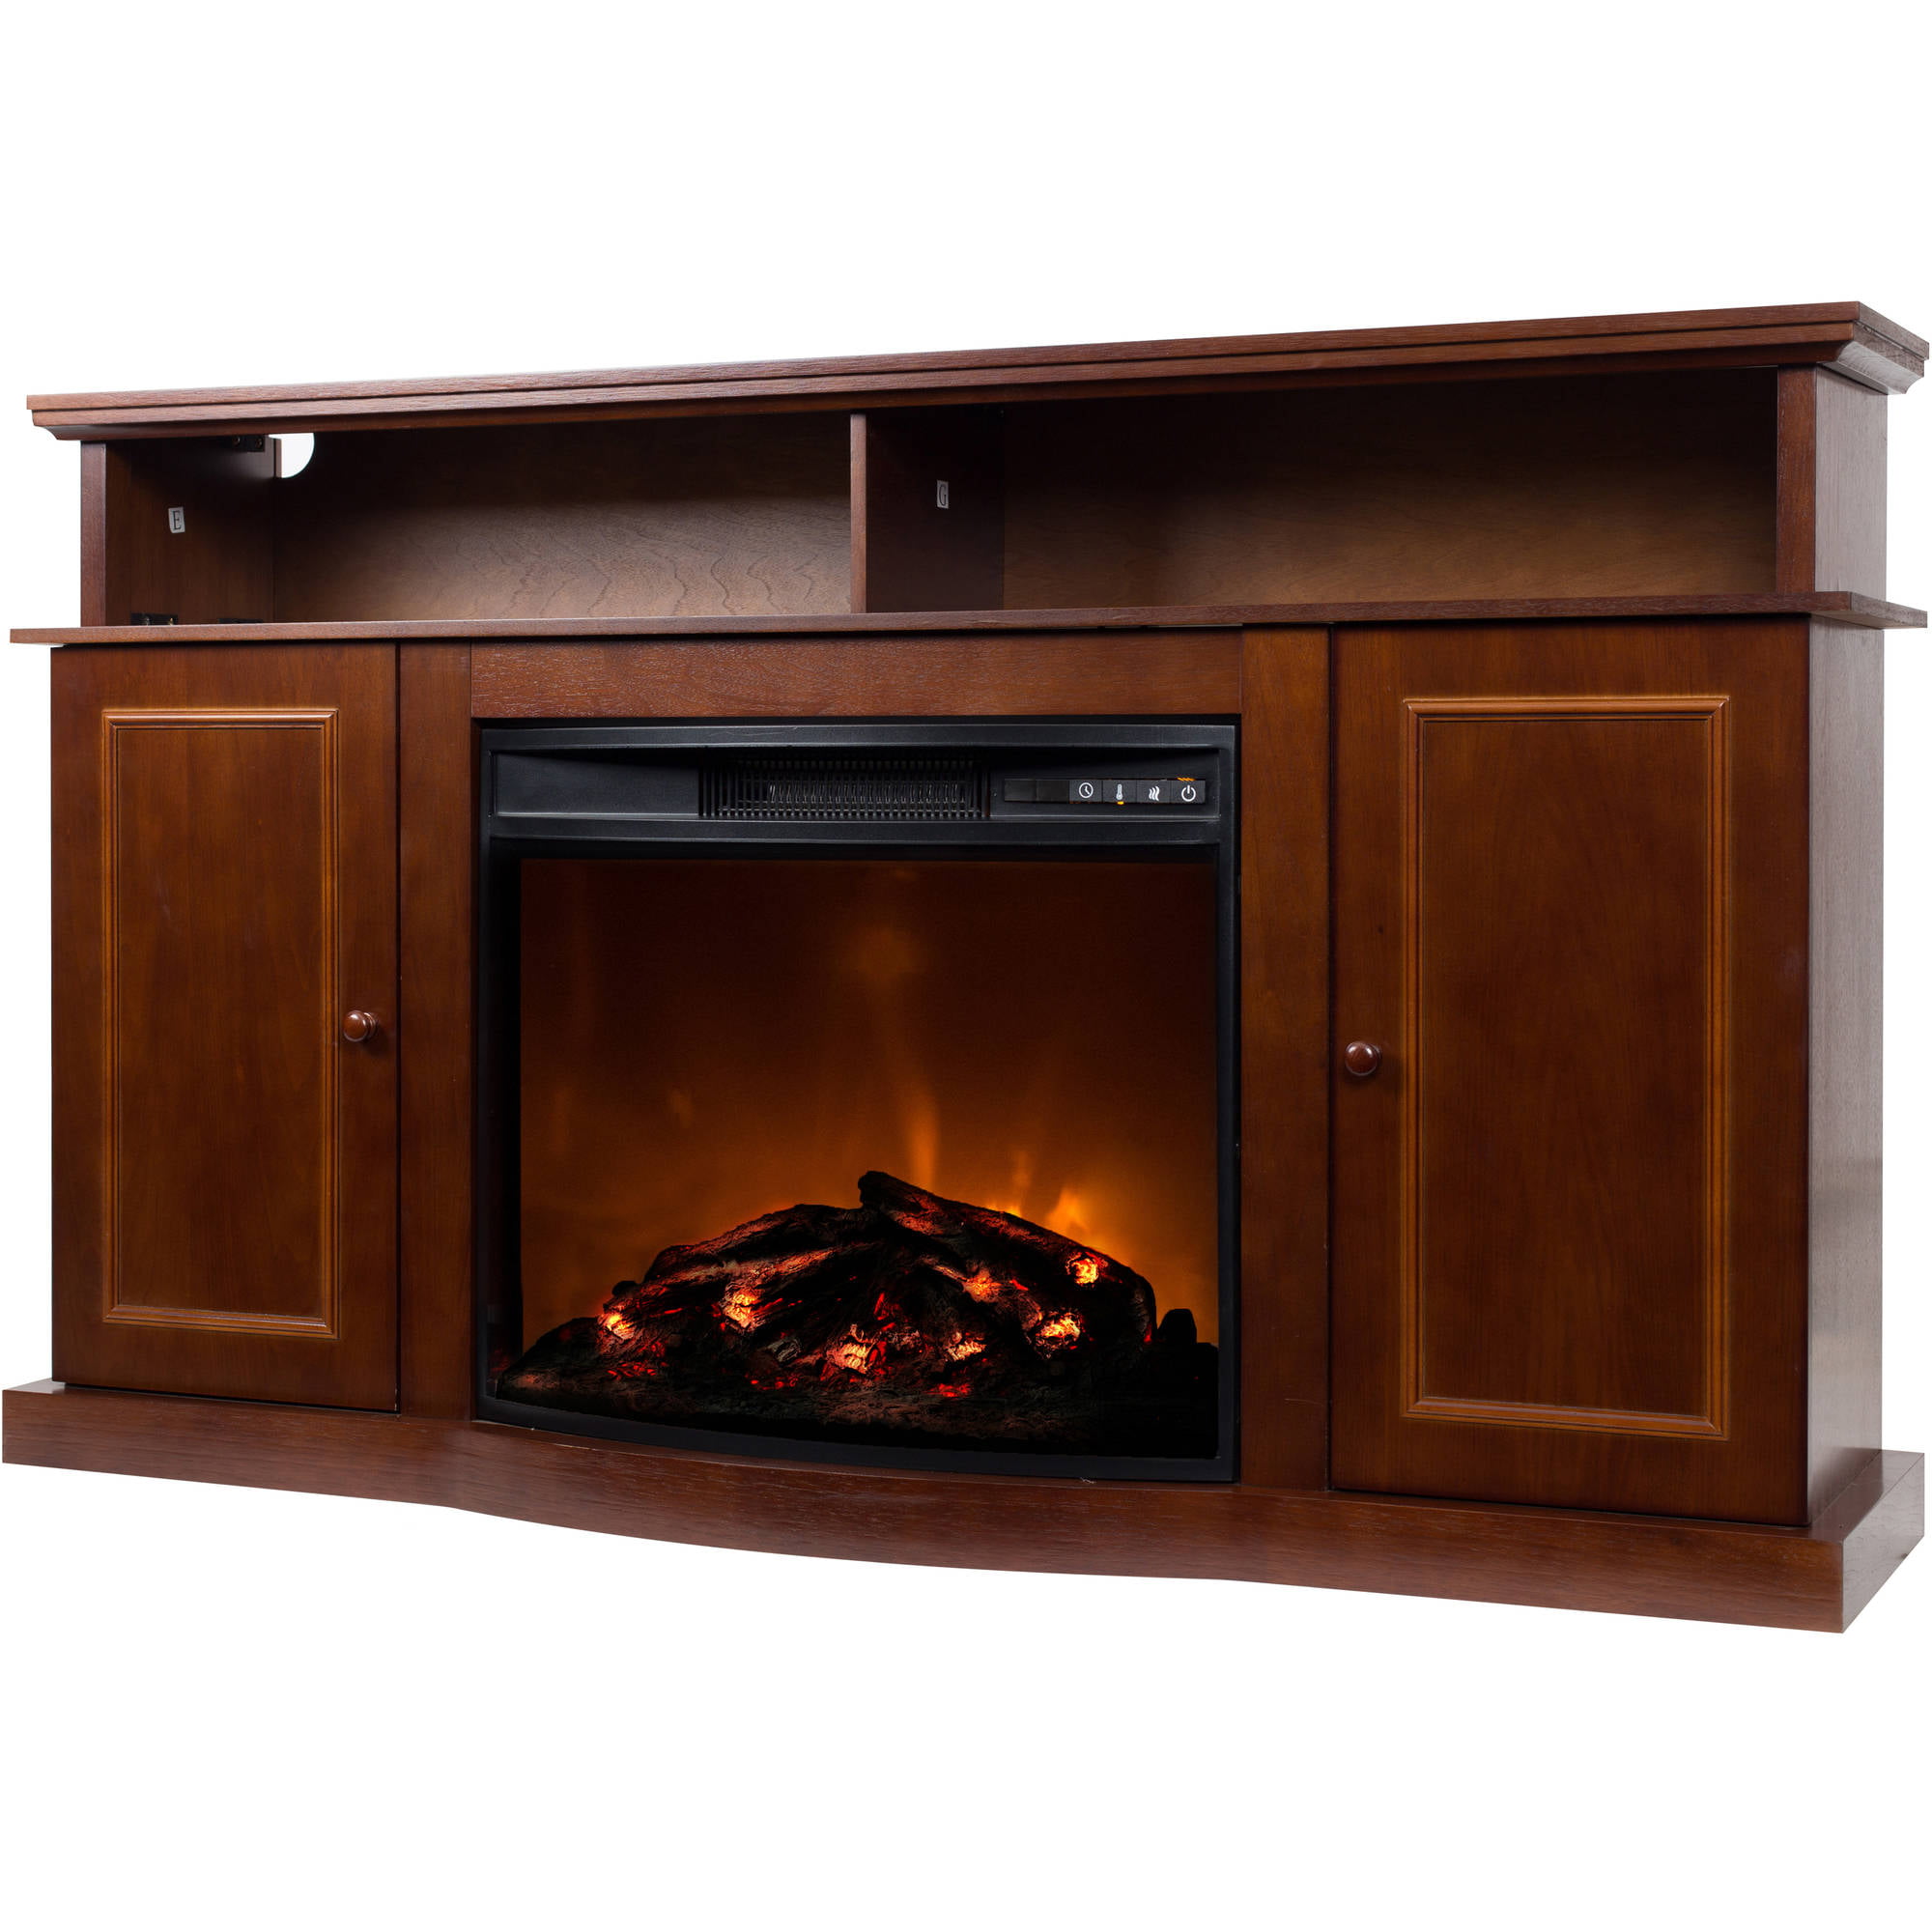 56 Inch TV Stand With Fireplace Media Console Electric Entertainment Center SALE  eBay